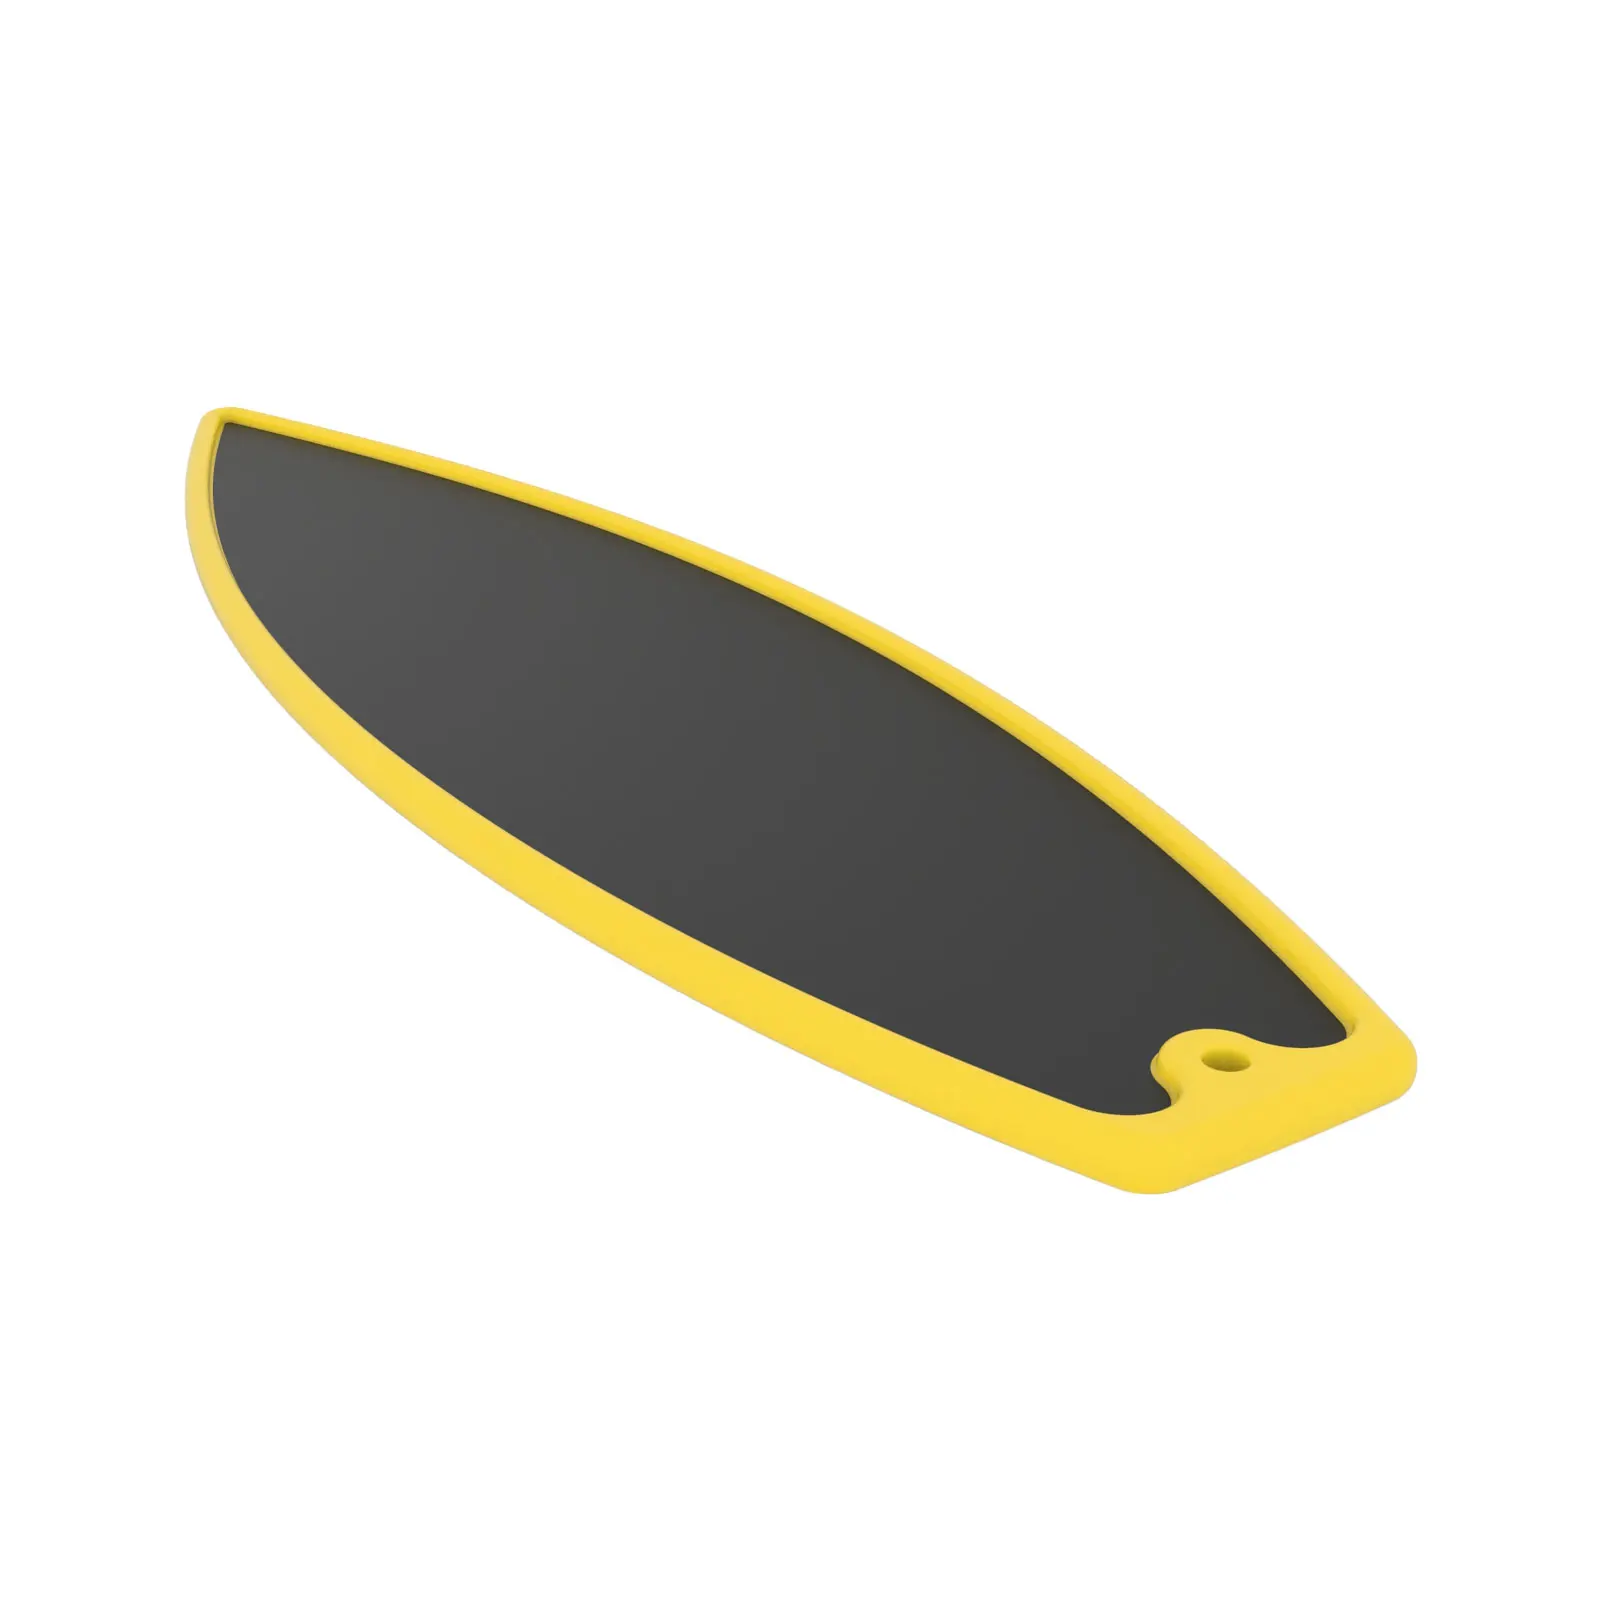 Mini Fingertip Surfboard Shred Deck Finger Surfboard Creative Fingertips Surf The Wind Mini Board For Kids And Surfers Looking